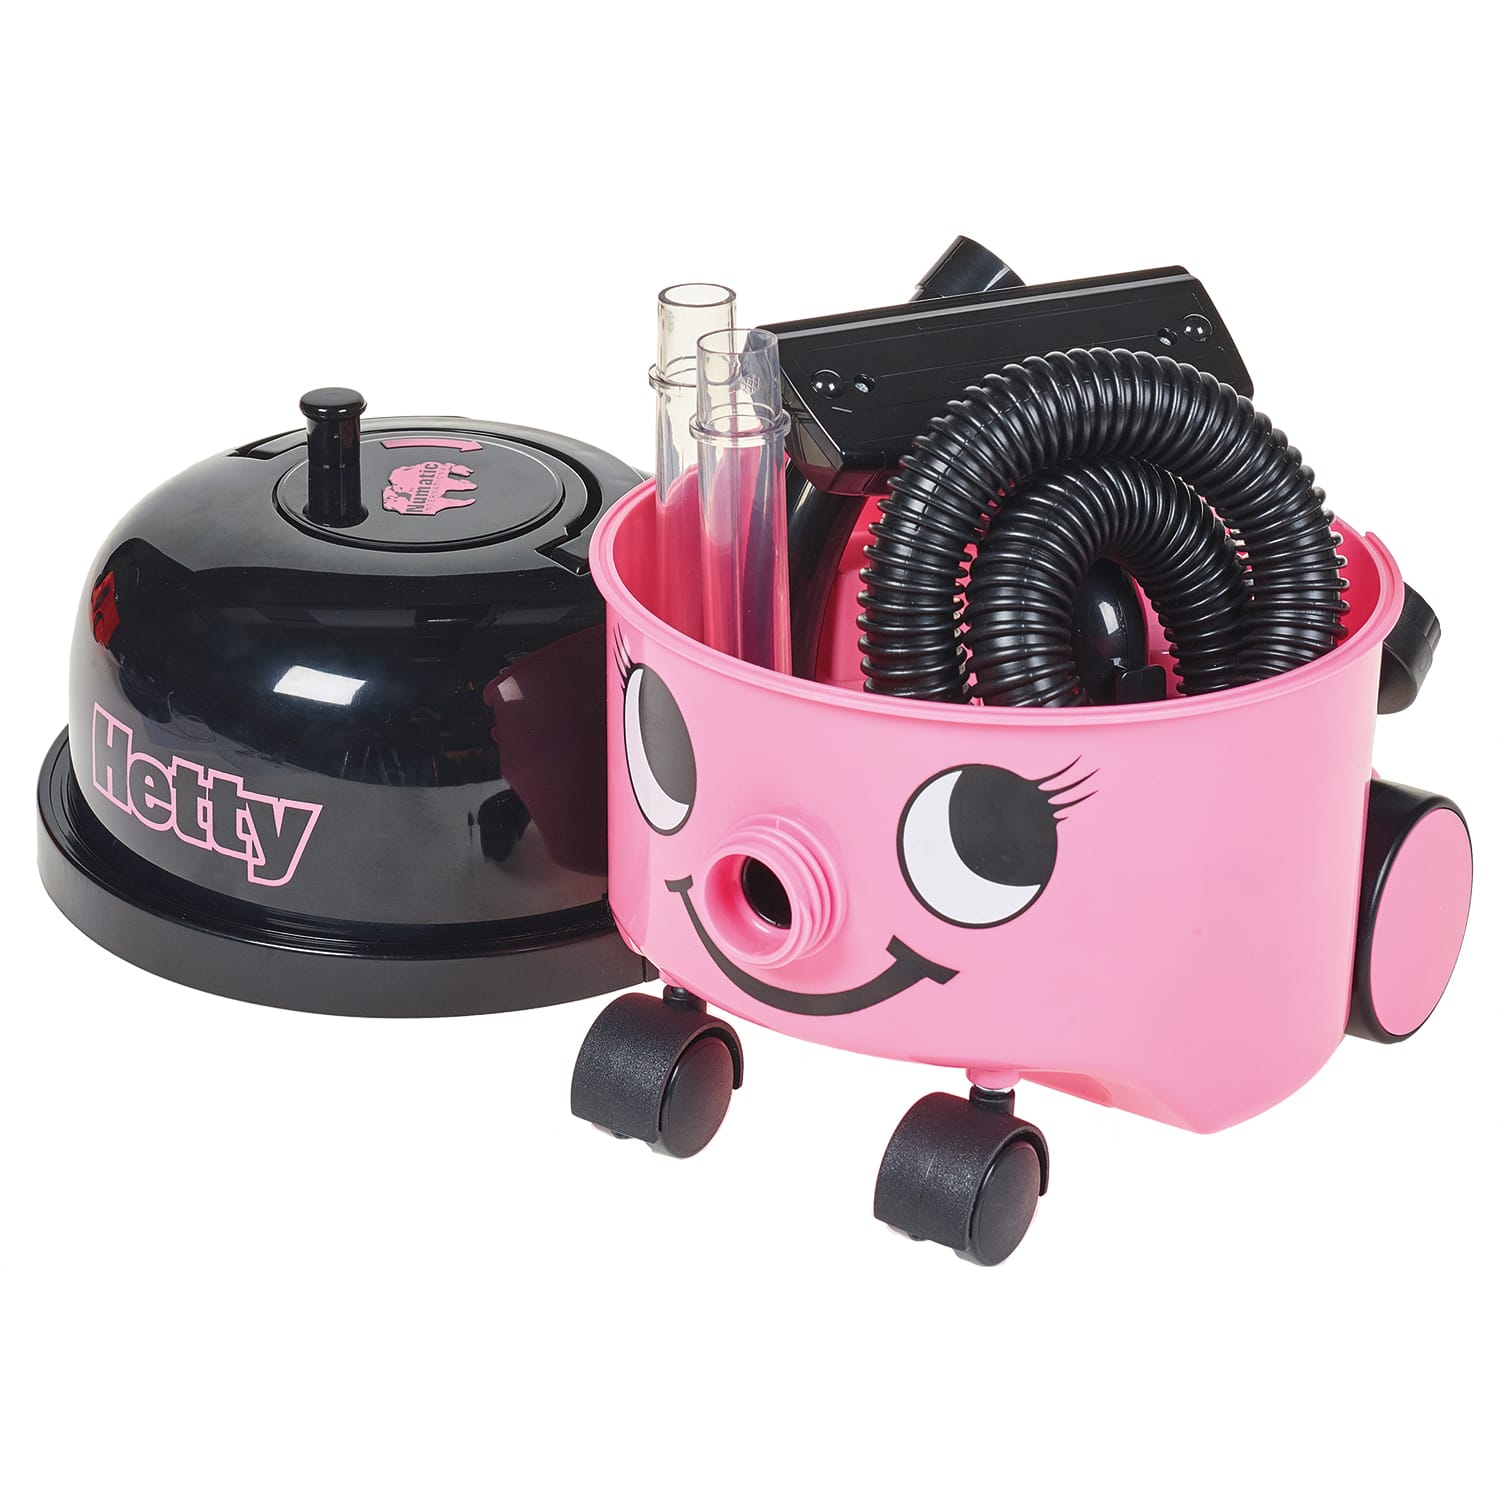 Details about   Henry Hetty Cleaning Trolley Vacuum Cleaner Hoover Casdon Kids Fun Role Play Toy 